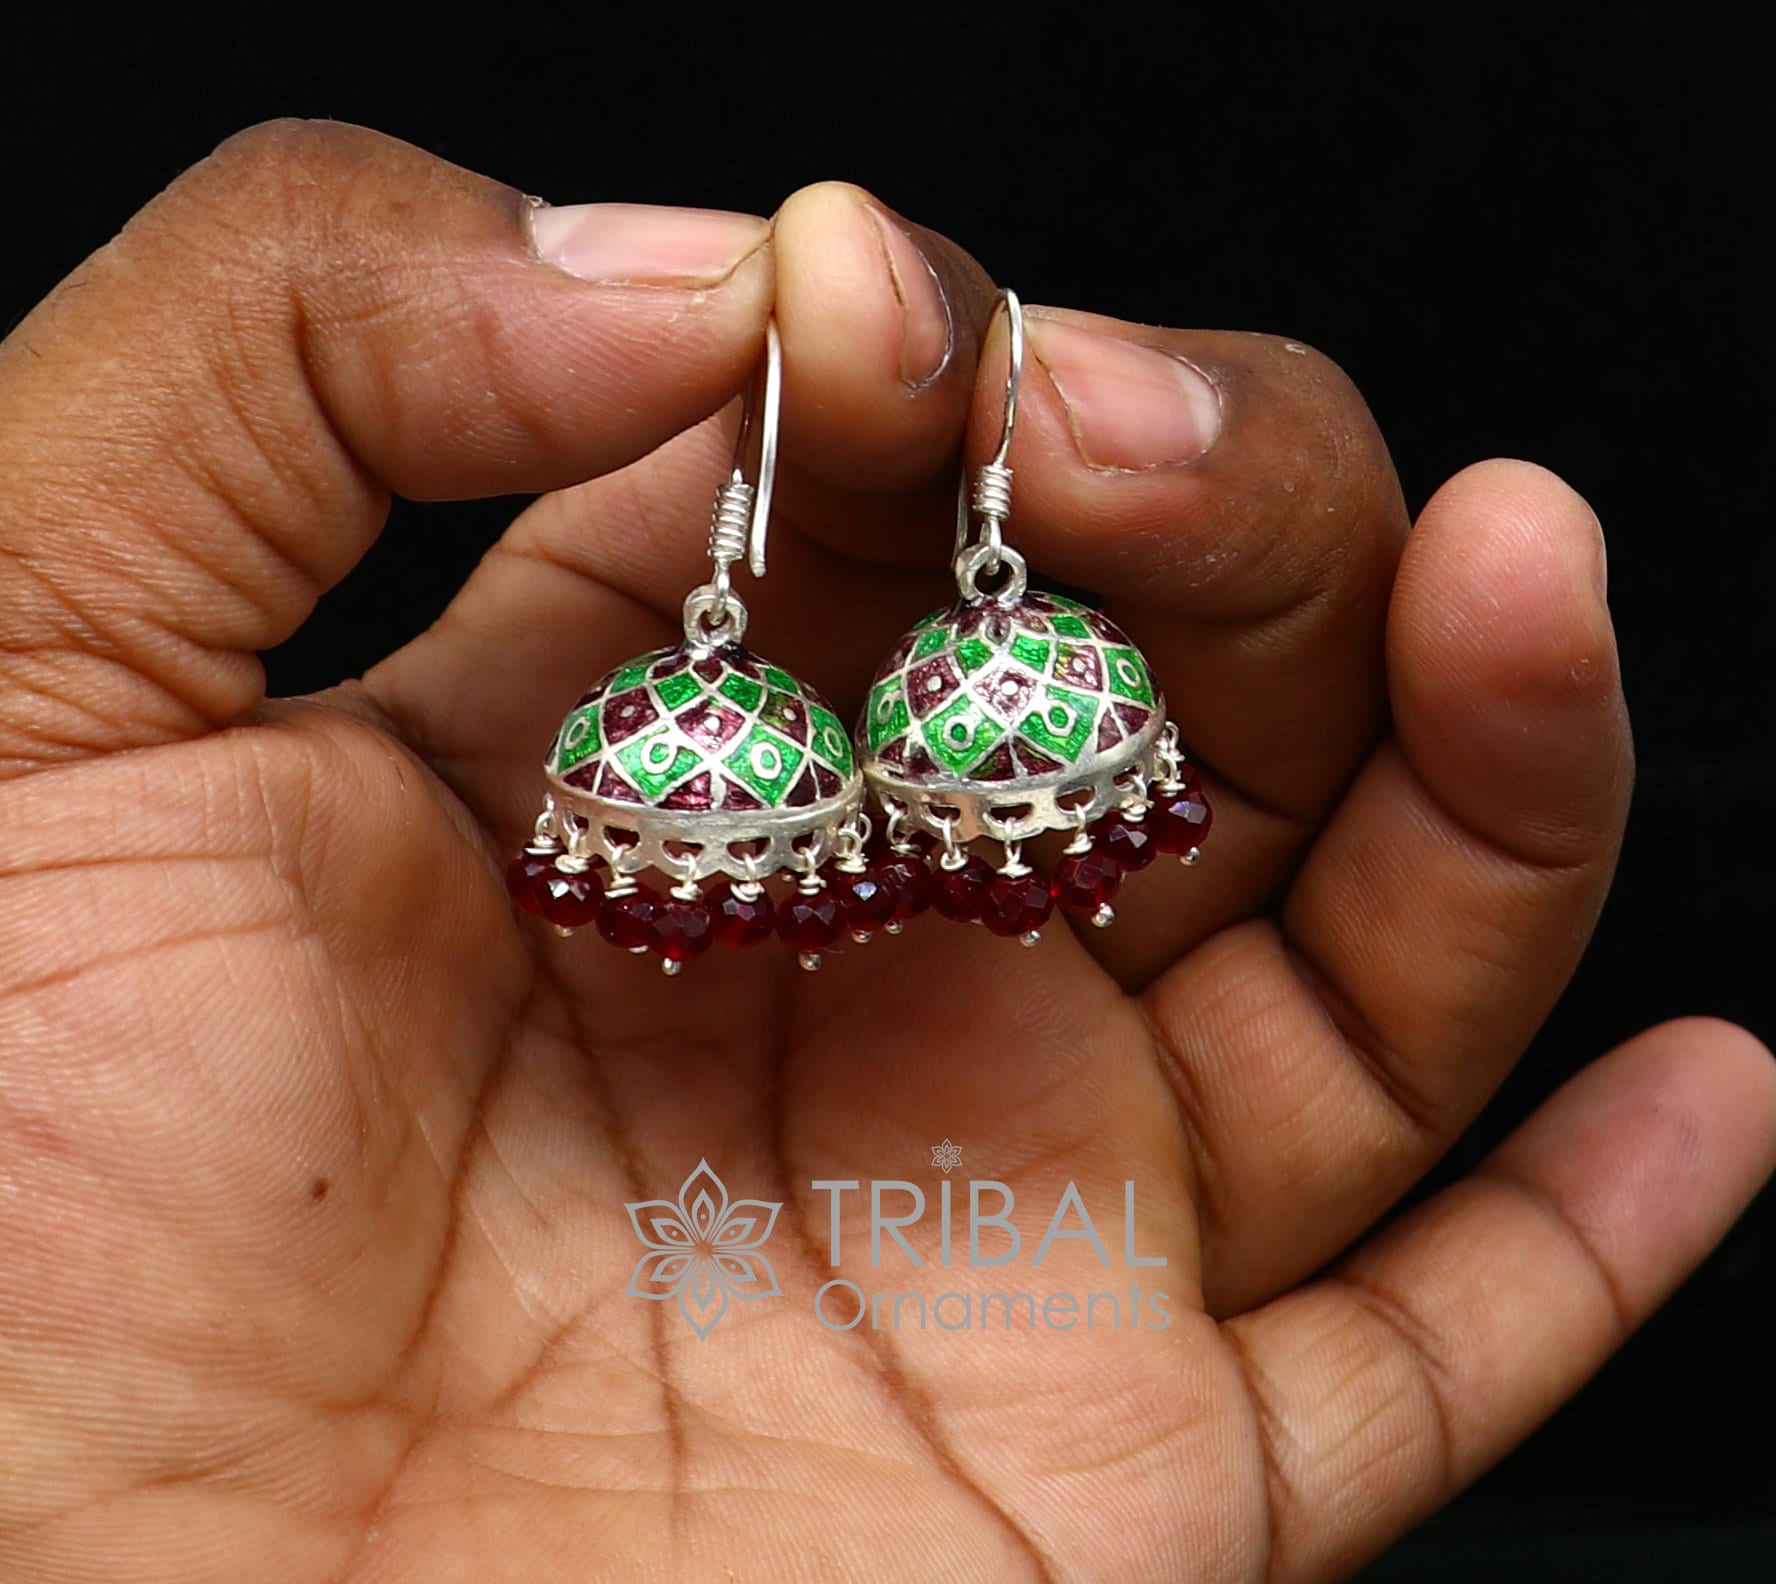 925 sterling silver handmade Stylish colorful hoops earring chandelier, enamel work jhumka with hanging drops best brides collection s1172 - TRIBAL ORNAMENTS